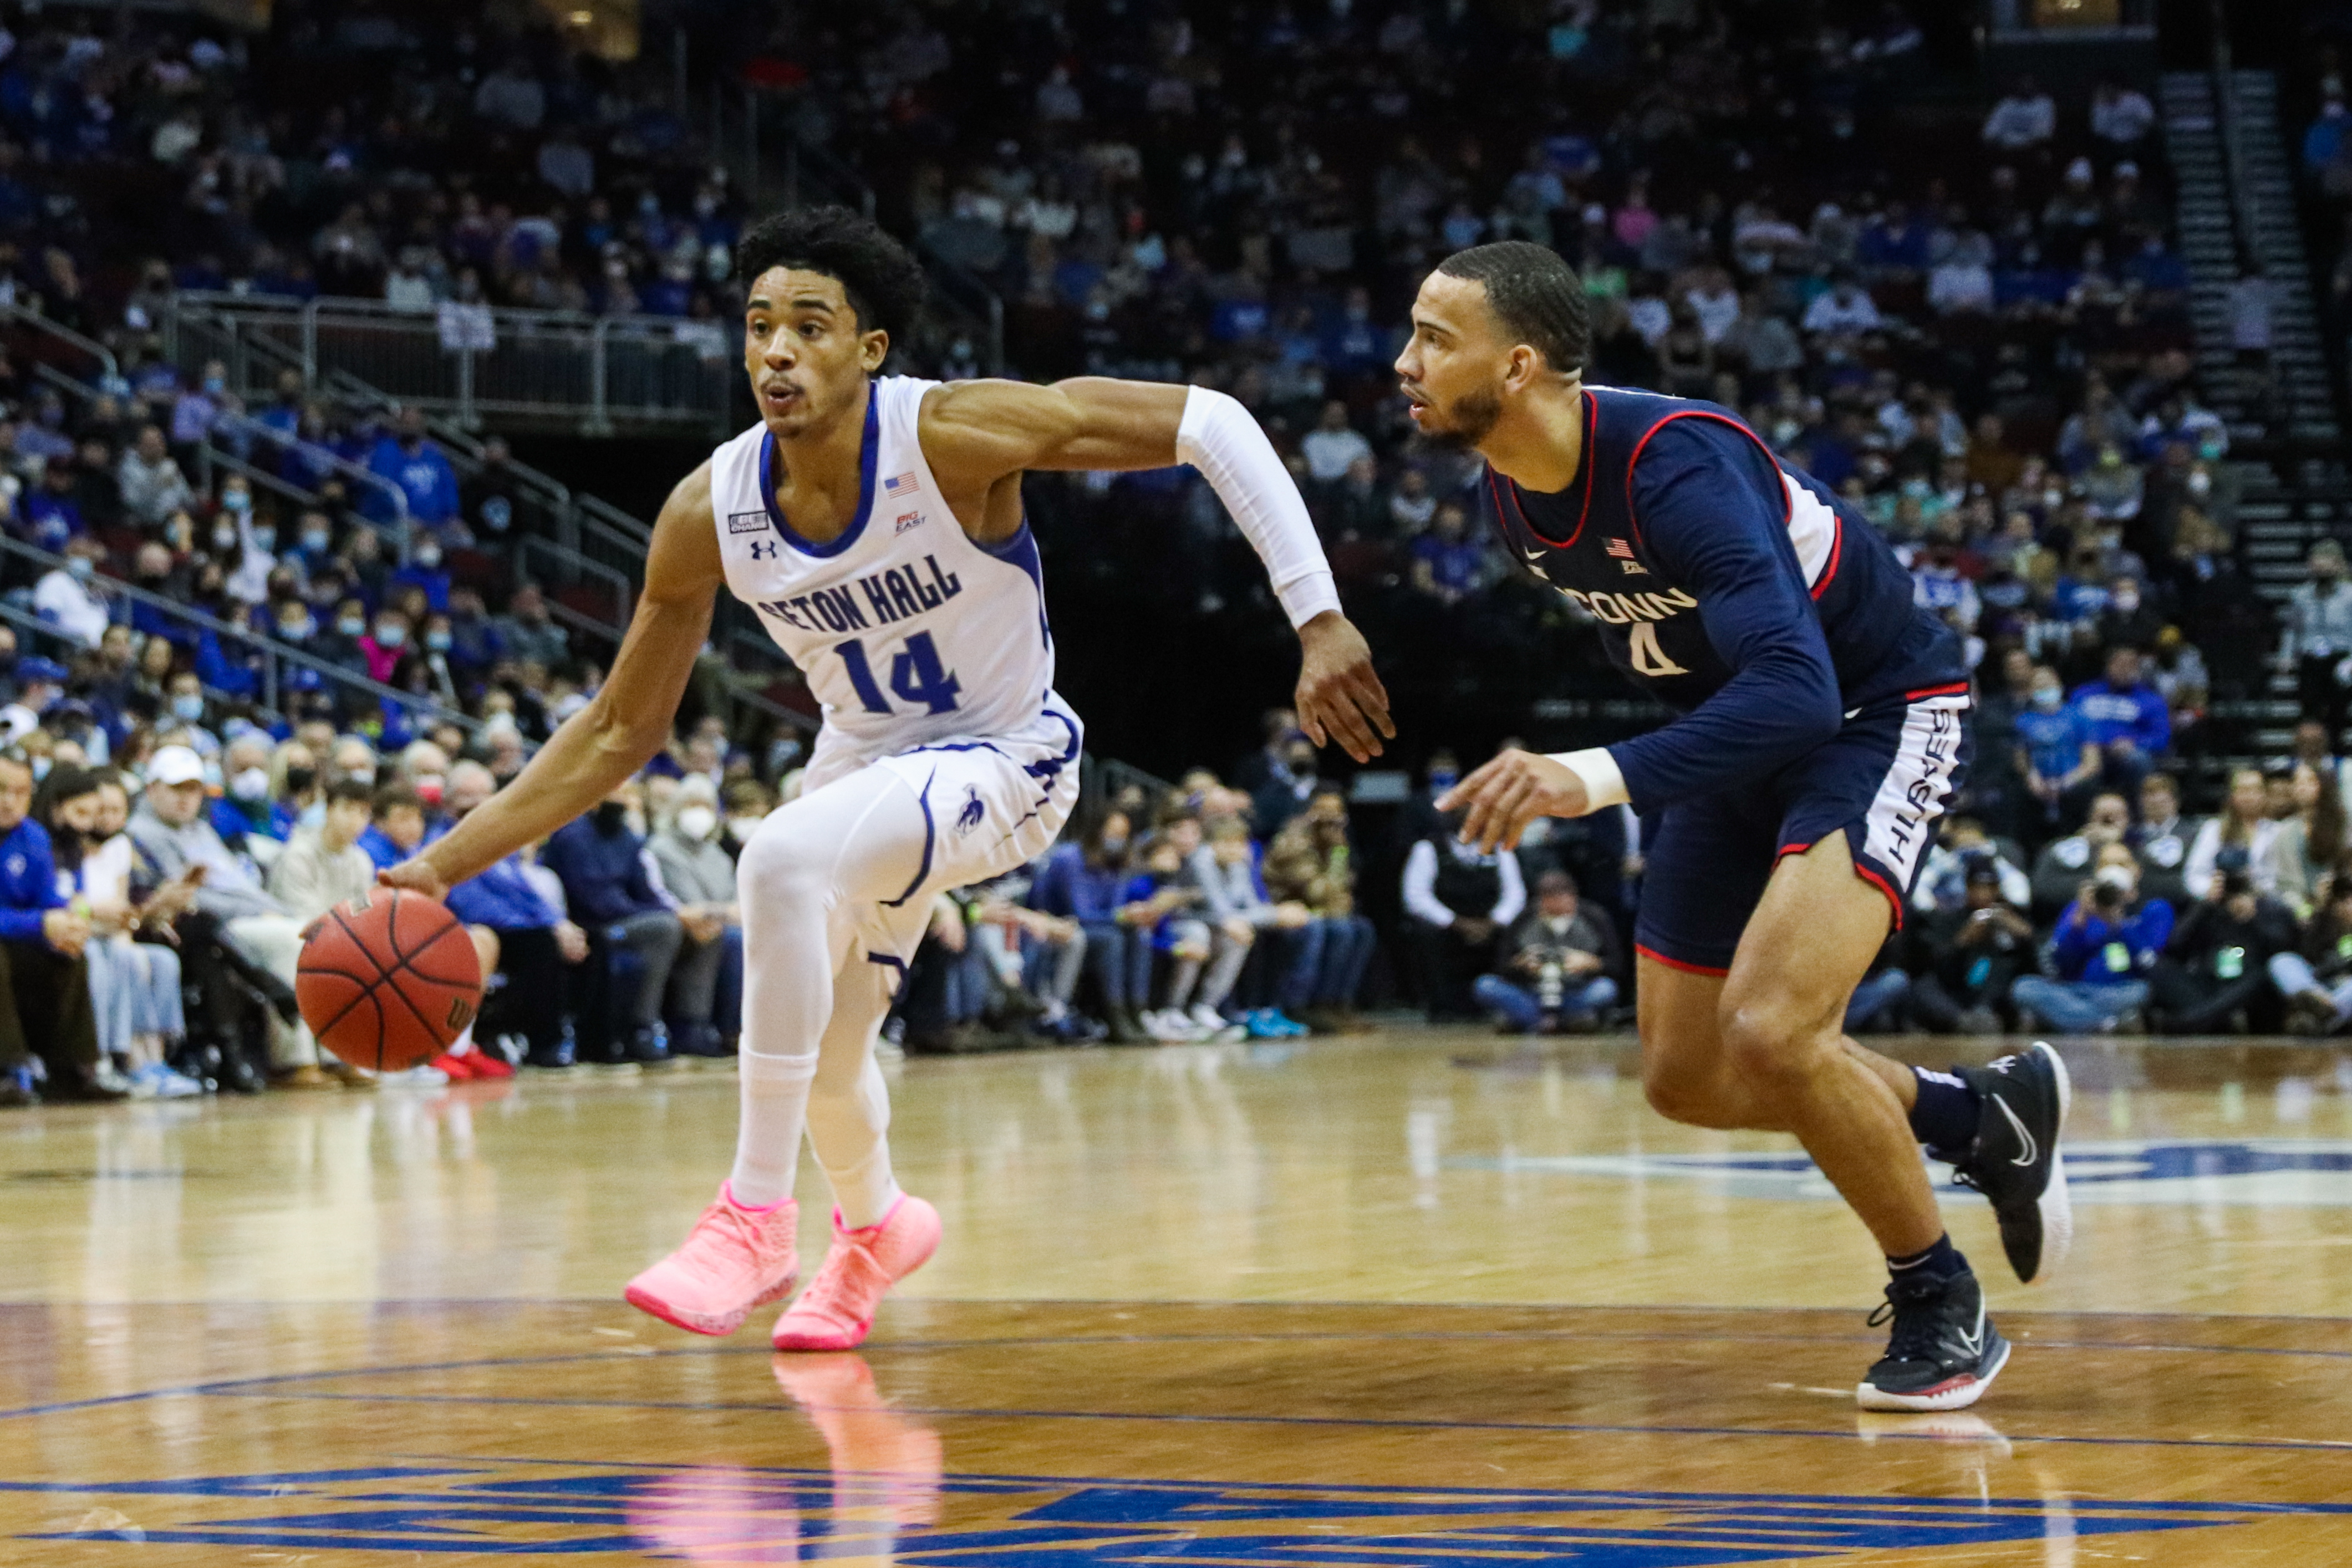 Seton Hall's Jared Rhoden drives to the basket vs. UConn during a home overtime victory.